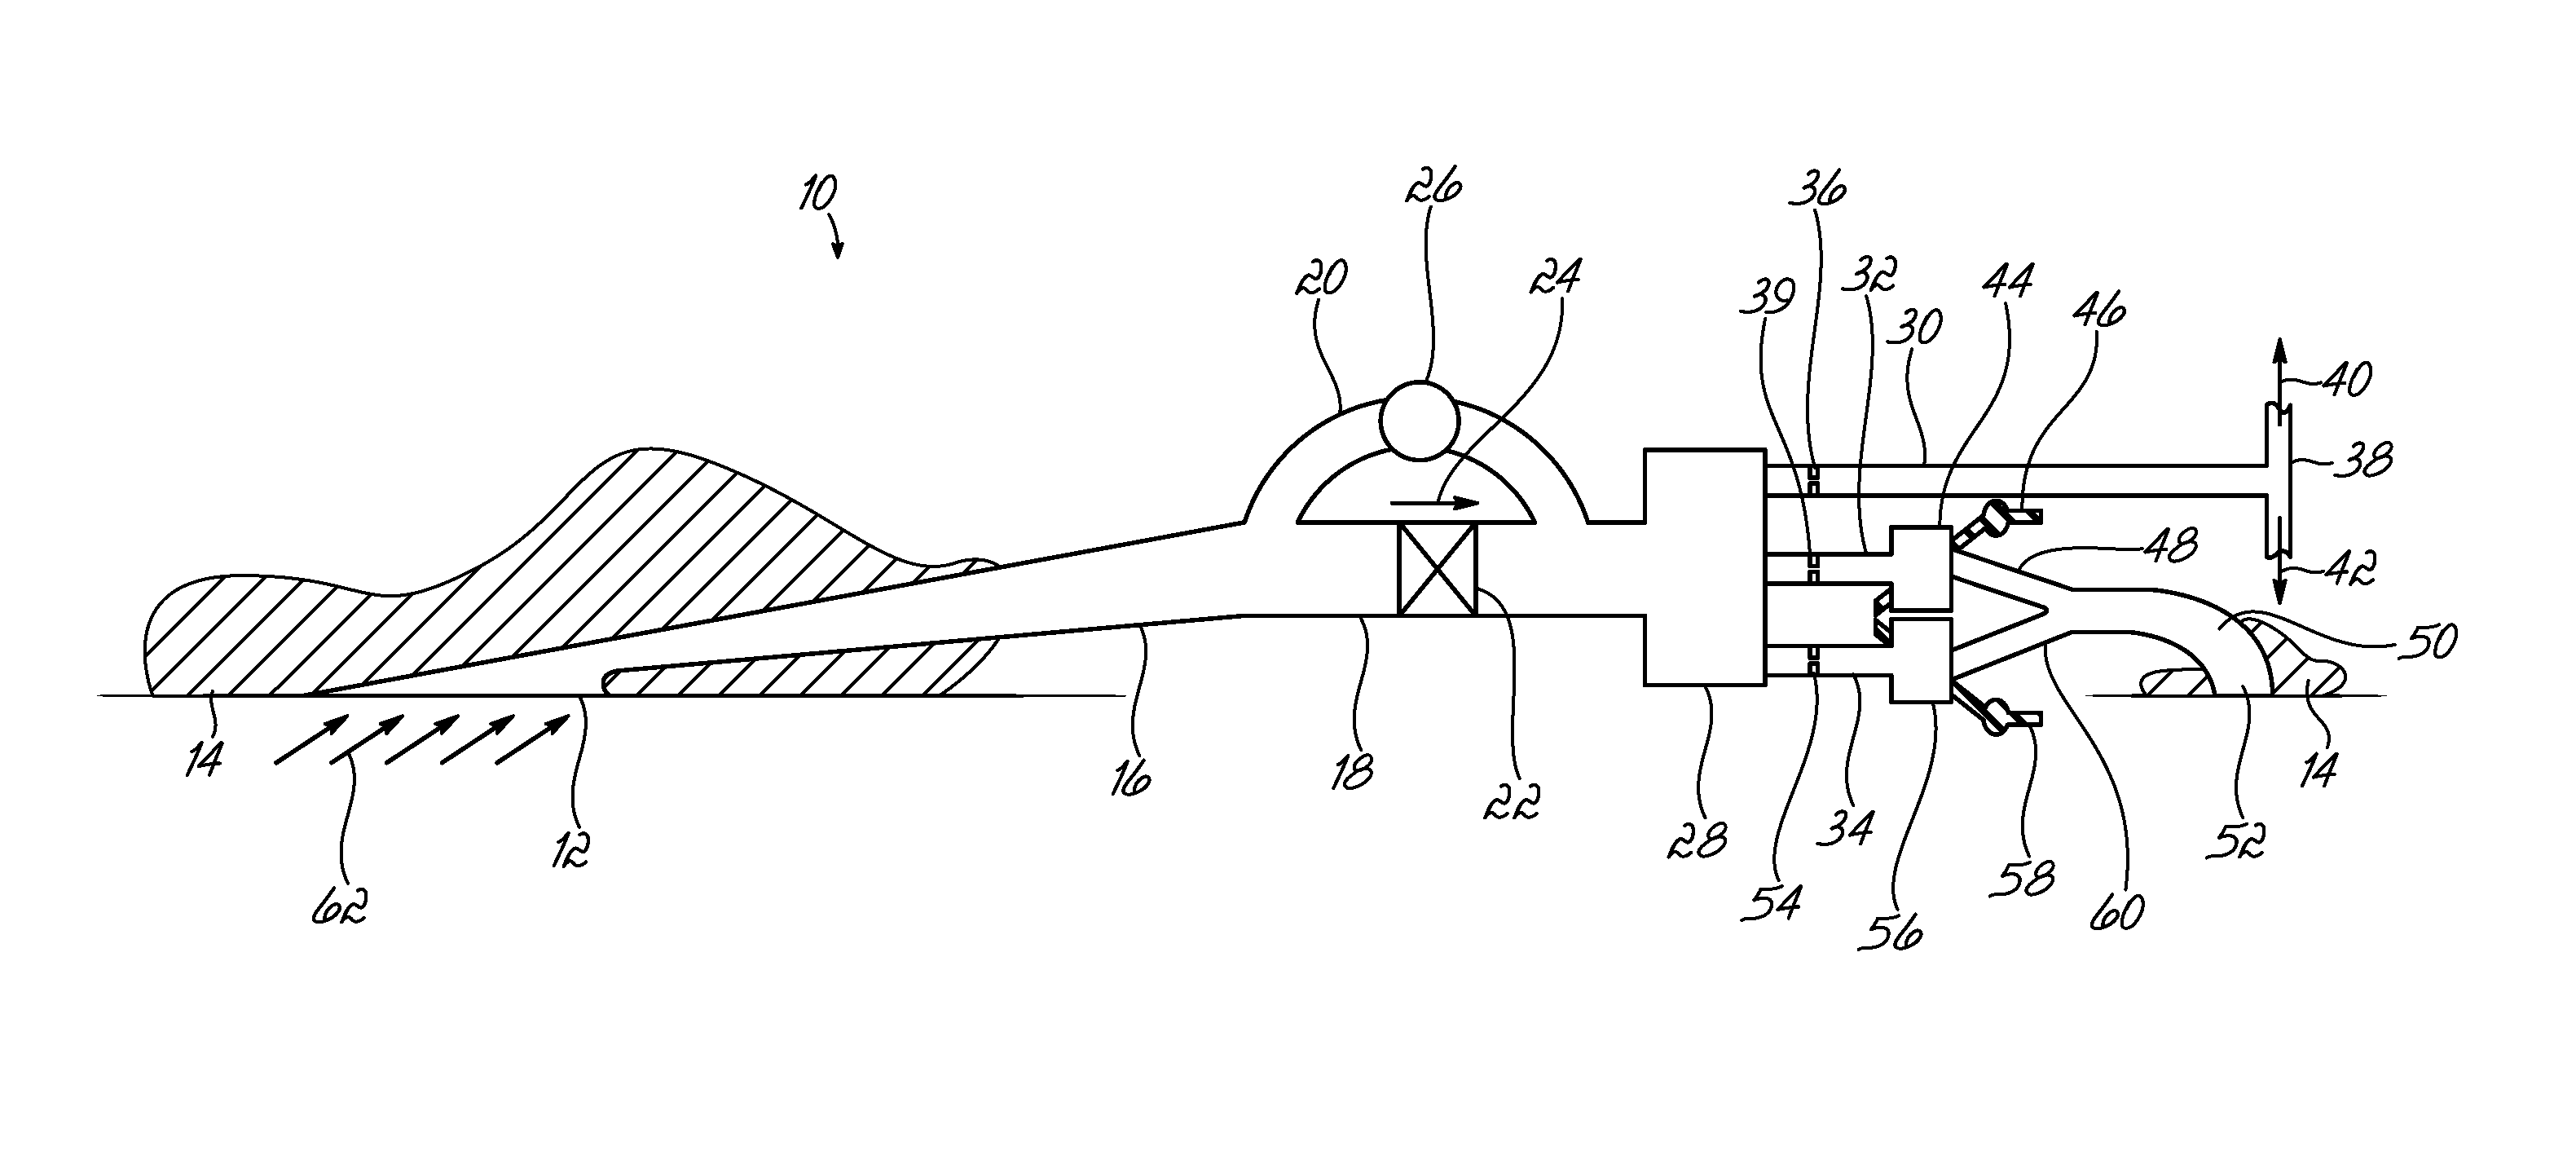 Cooling air supply for the cooling of different systems requiring cooling air in an aircraft